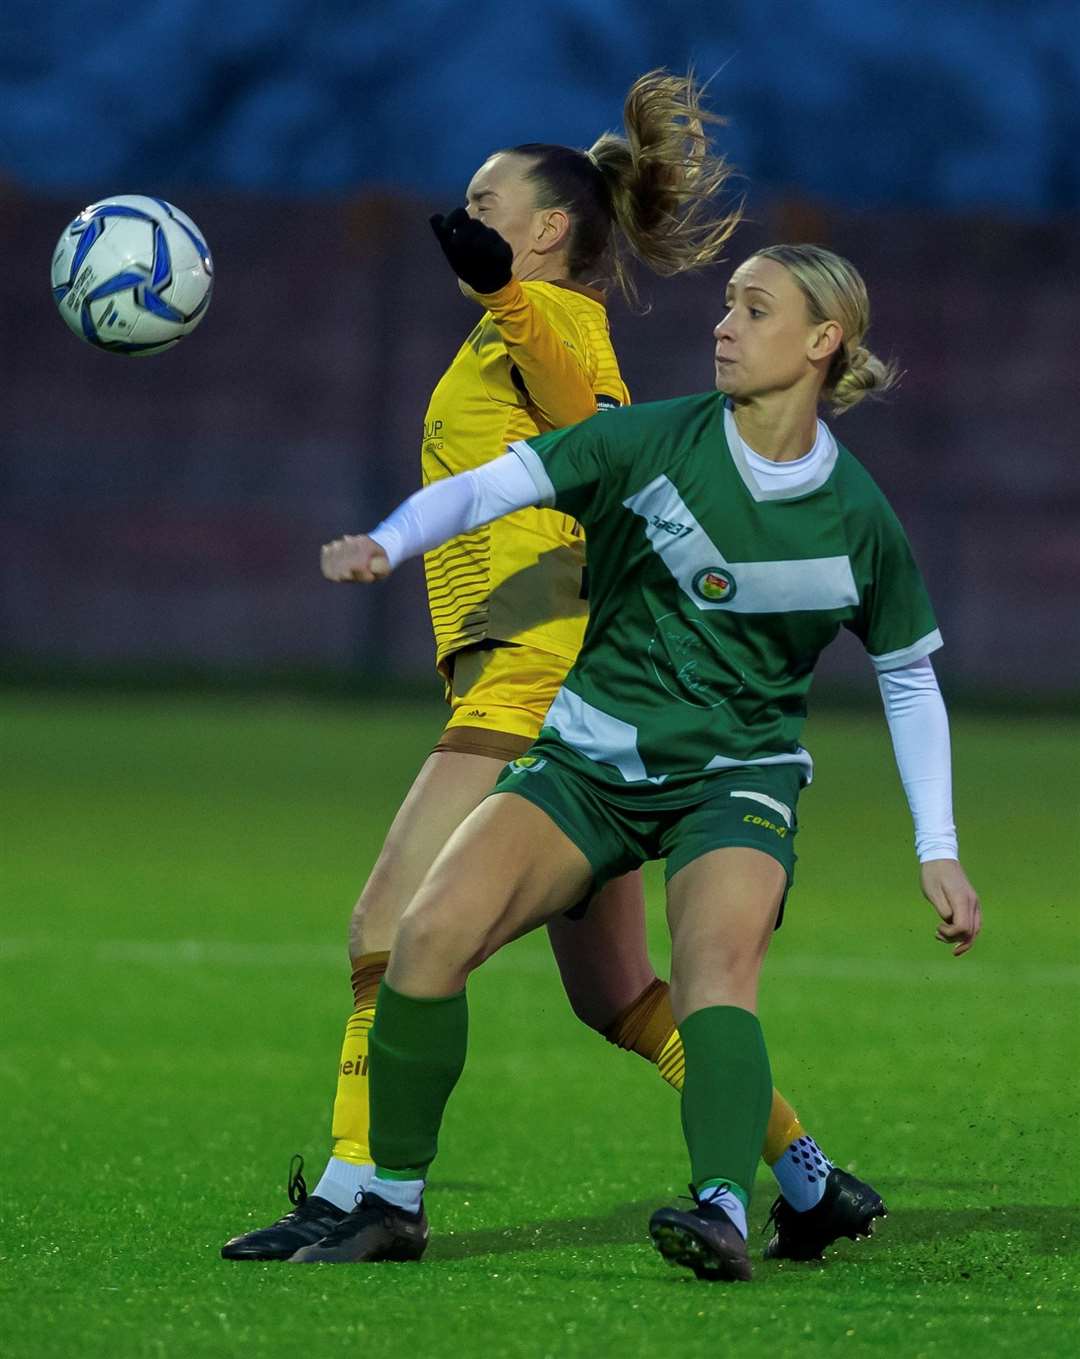 Action from Ashford United Ladies’ 4-1 win over Sutton United on Sunday. Picture: Ian Scammell